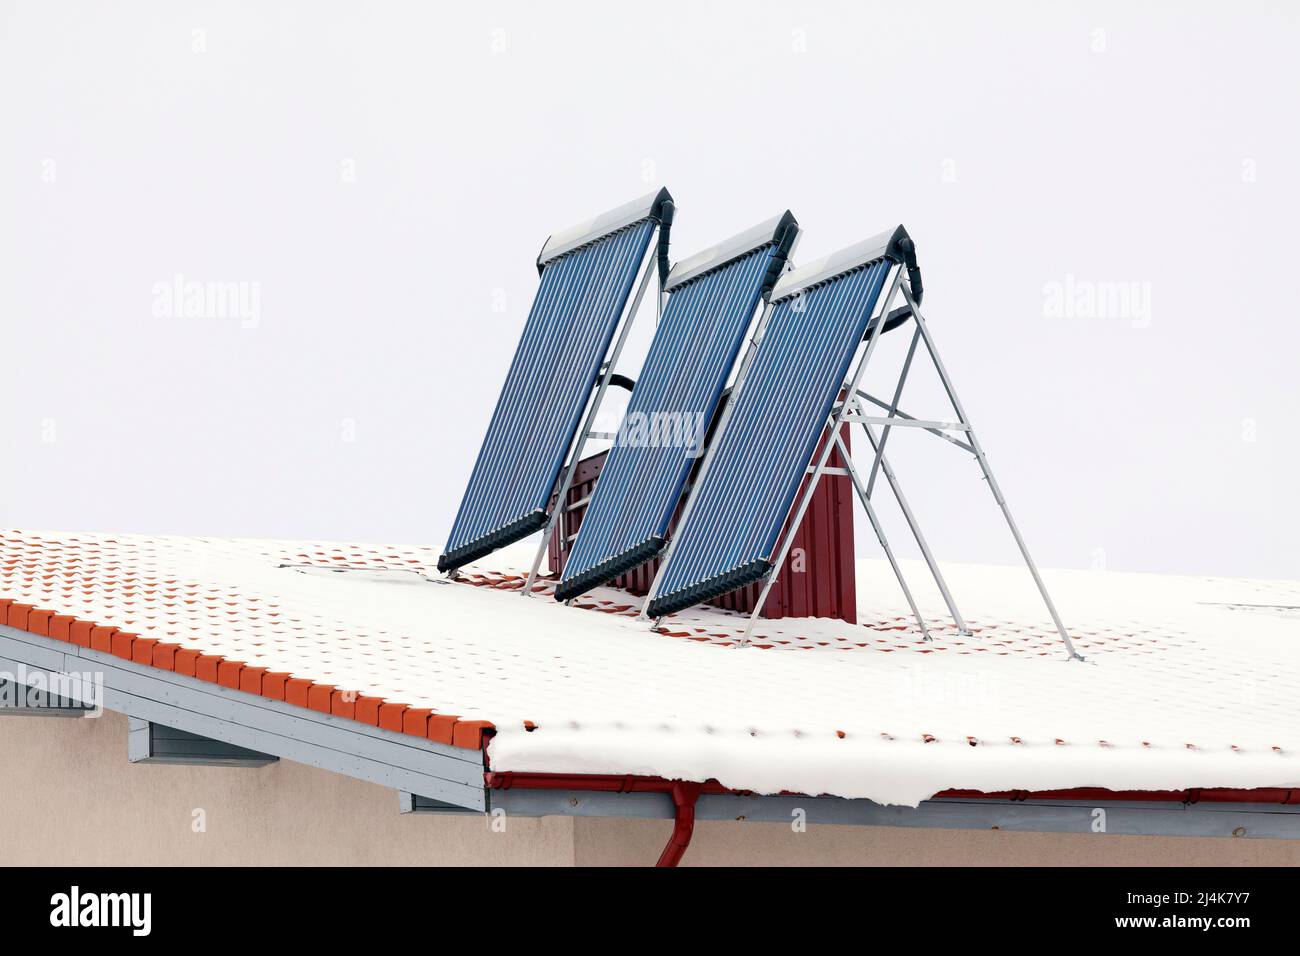 Snowy house roof in winter with solar panels for electric power generation Stock Photo